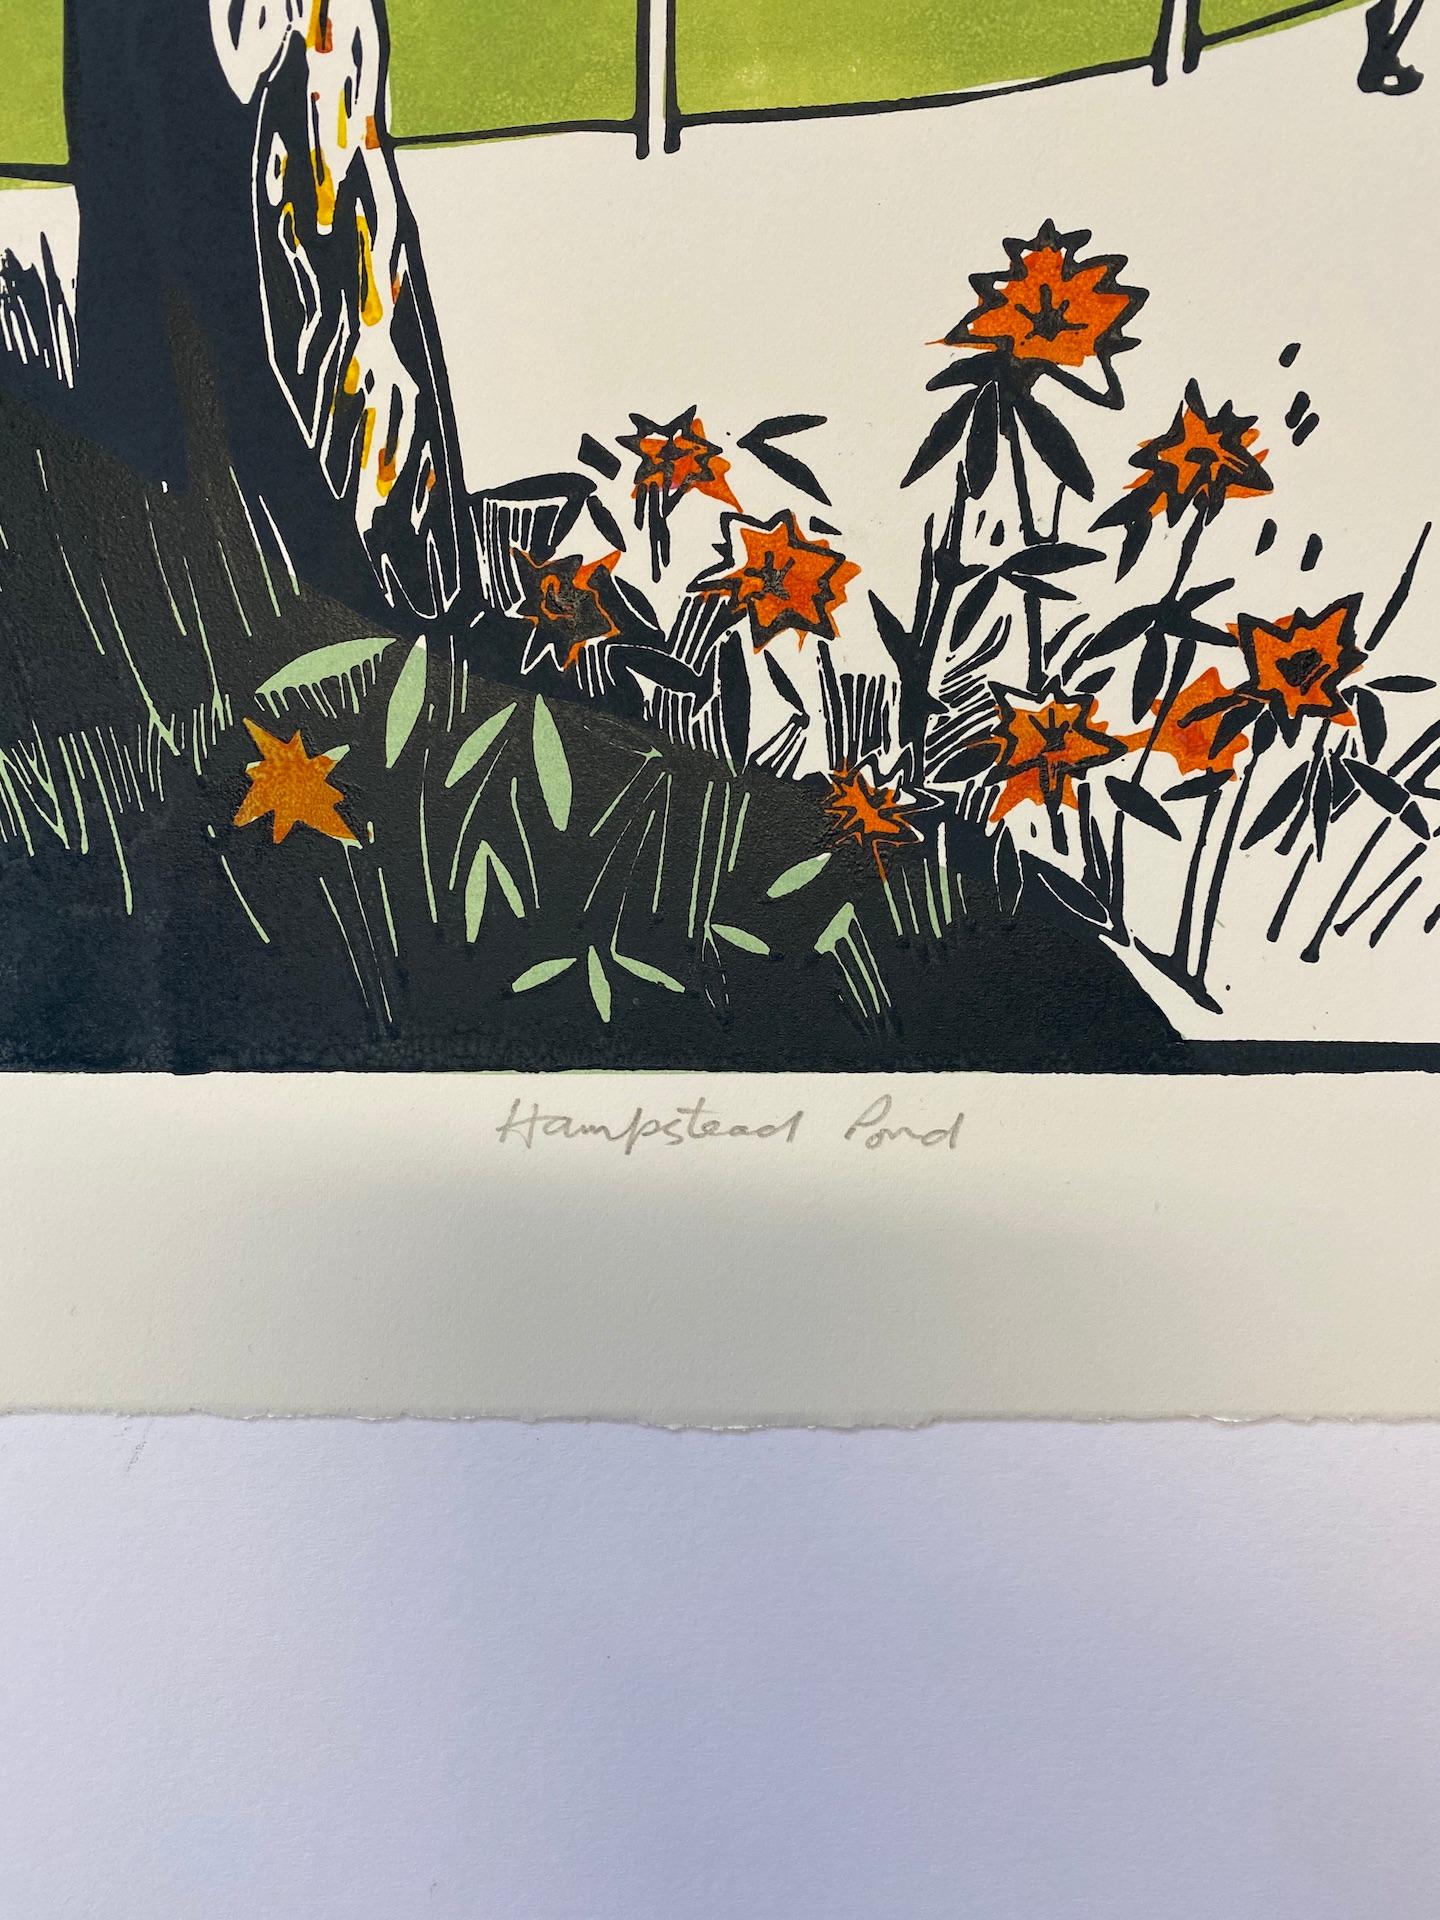 Colin Moore
Hampstead Pond
Limited Edition 3 Block Linocut
Edition of 100
Image Size: H 42cm x W 59.5cm
Sheet Size: H 51cm x W 67cm x D 0.1cm
Sold Unframed
Please note that in situ images are purely an indication of how a piece may look.

Hampsted